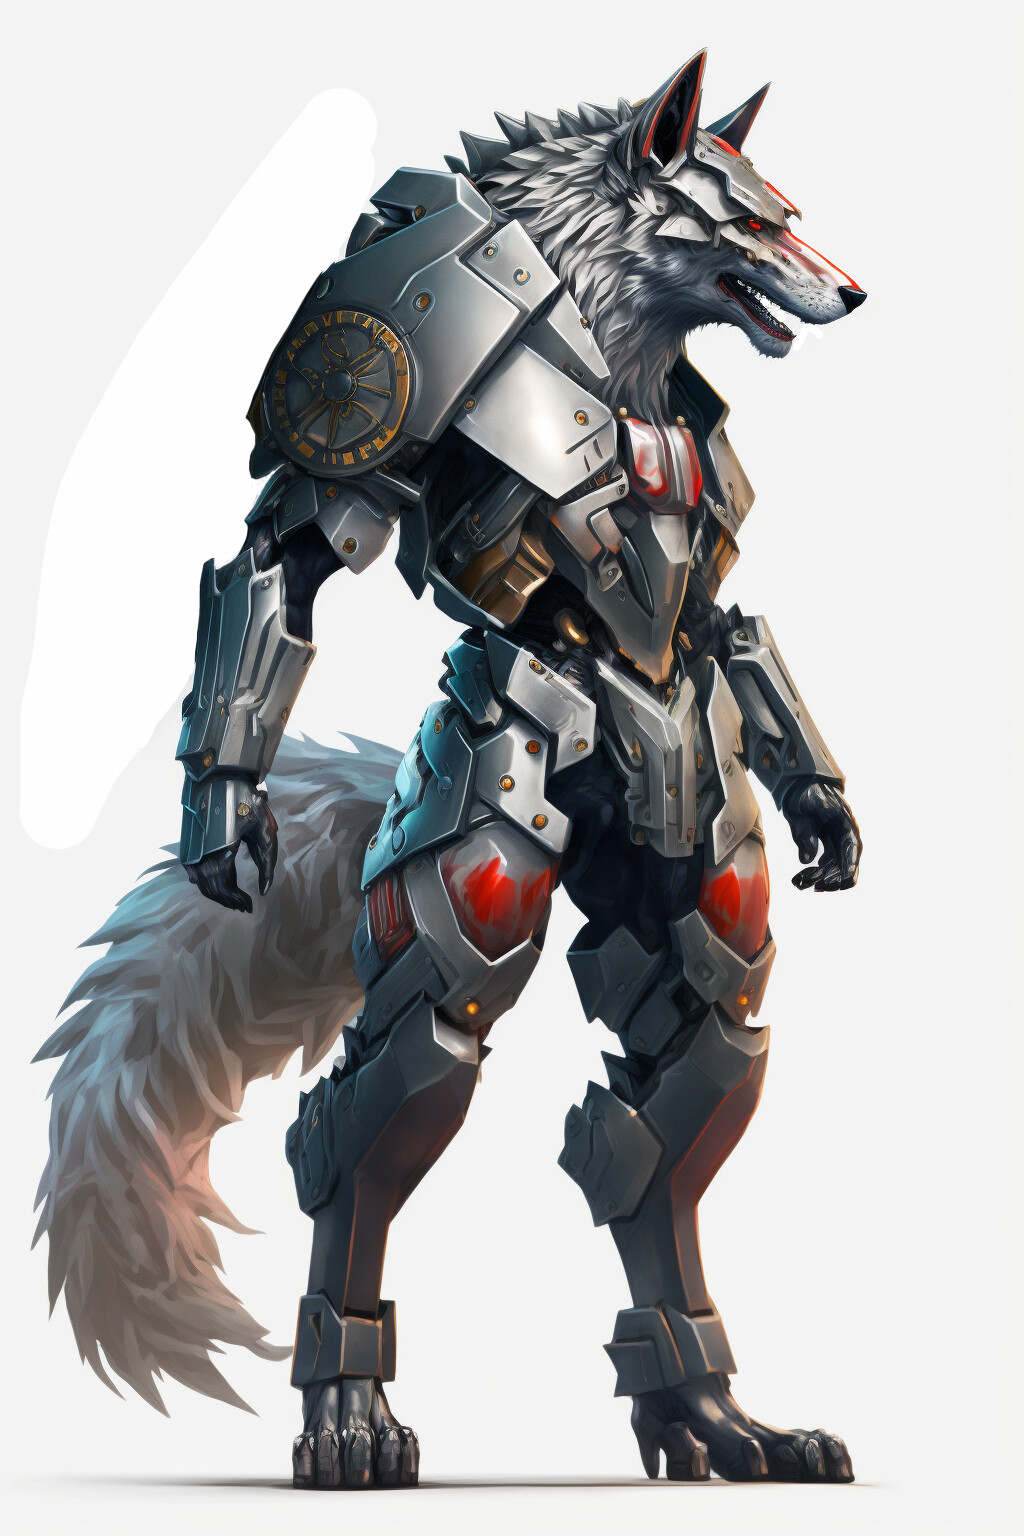 wolf characters